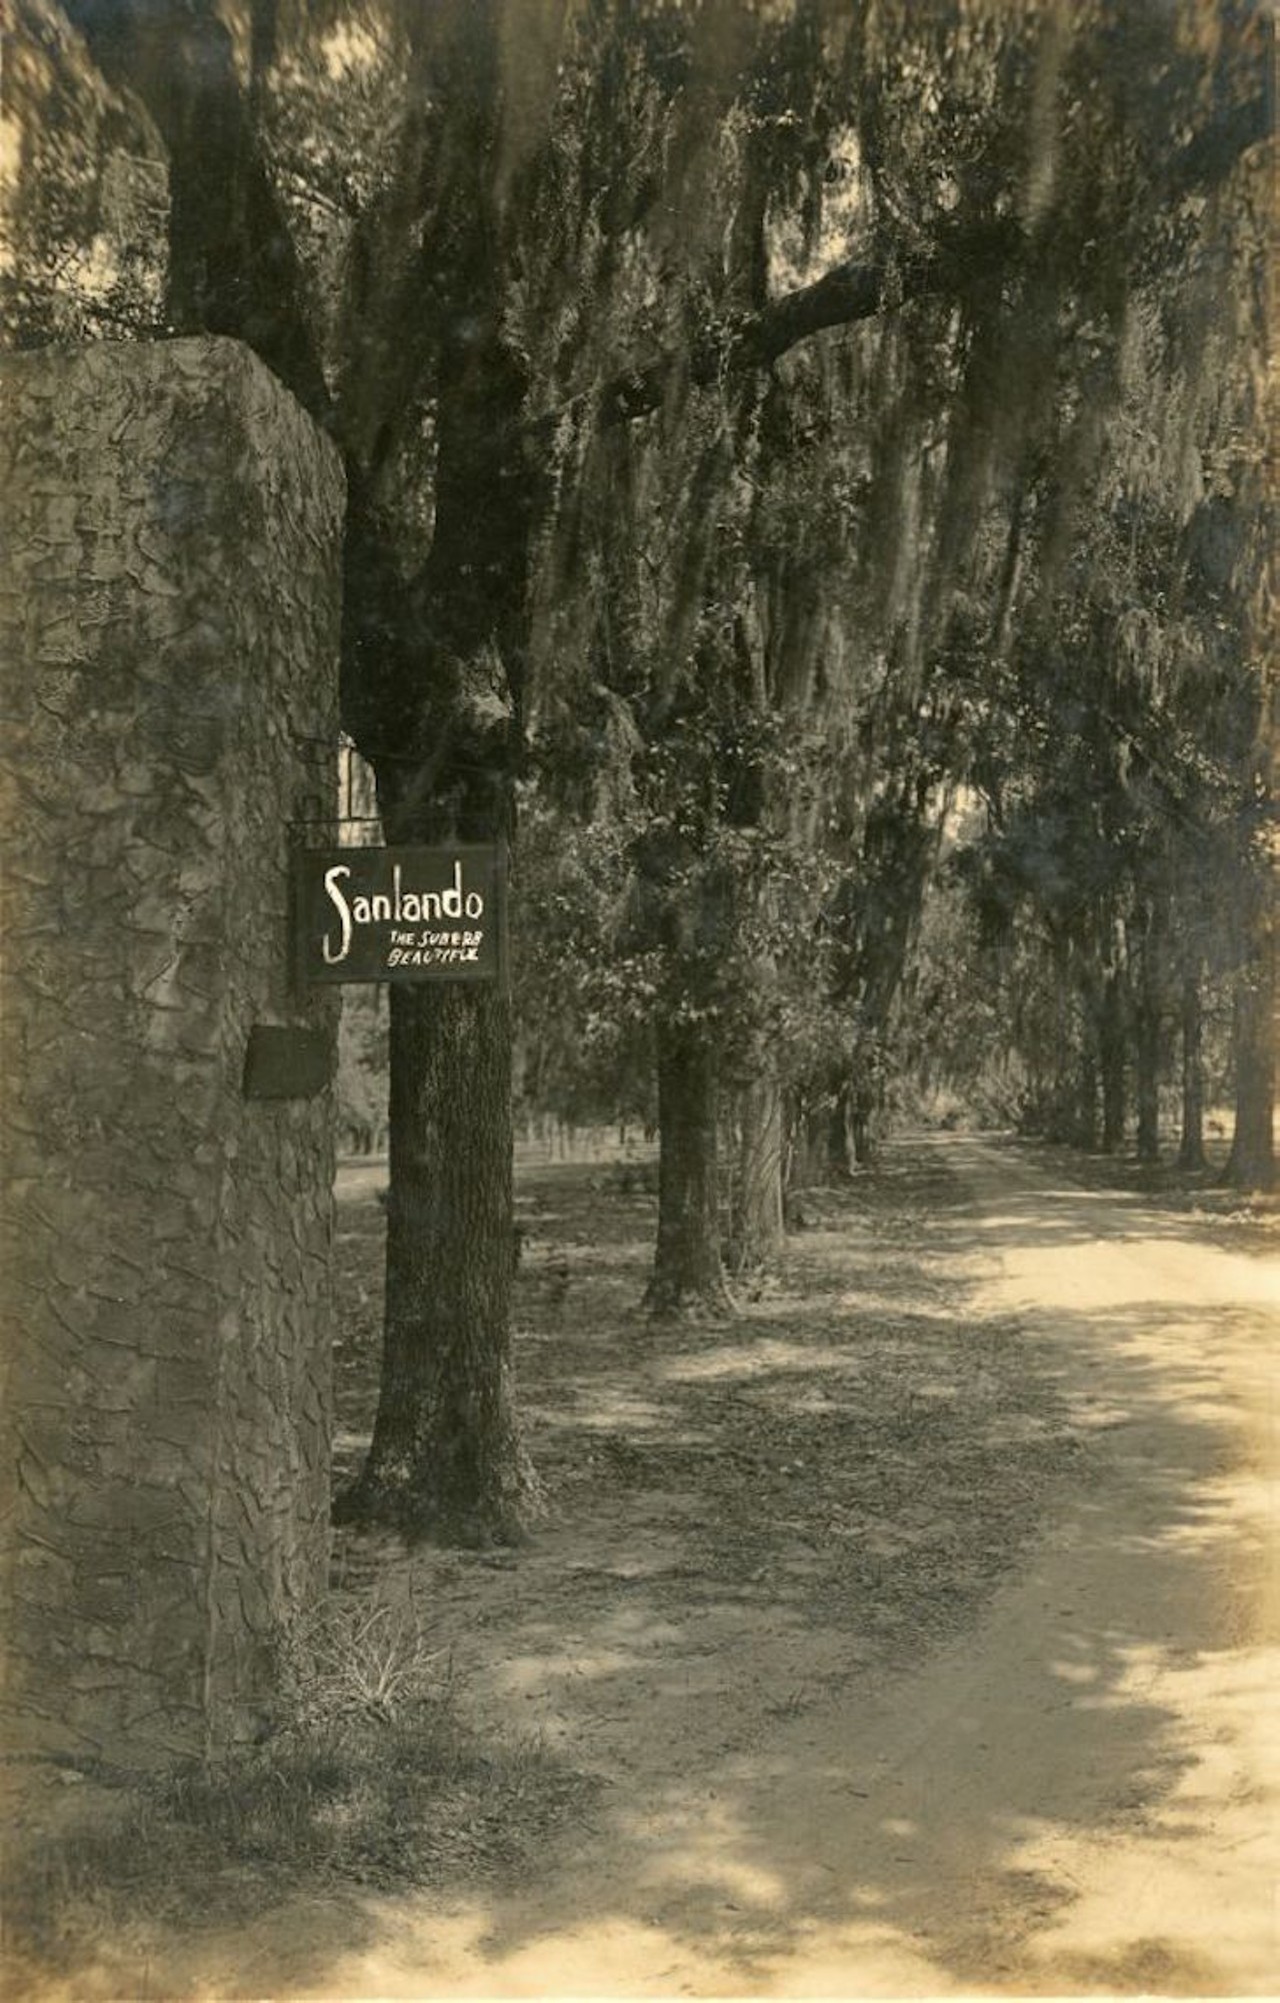 Sign at the entrance to Sanlando in Altamonte Springs, 1924.